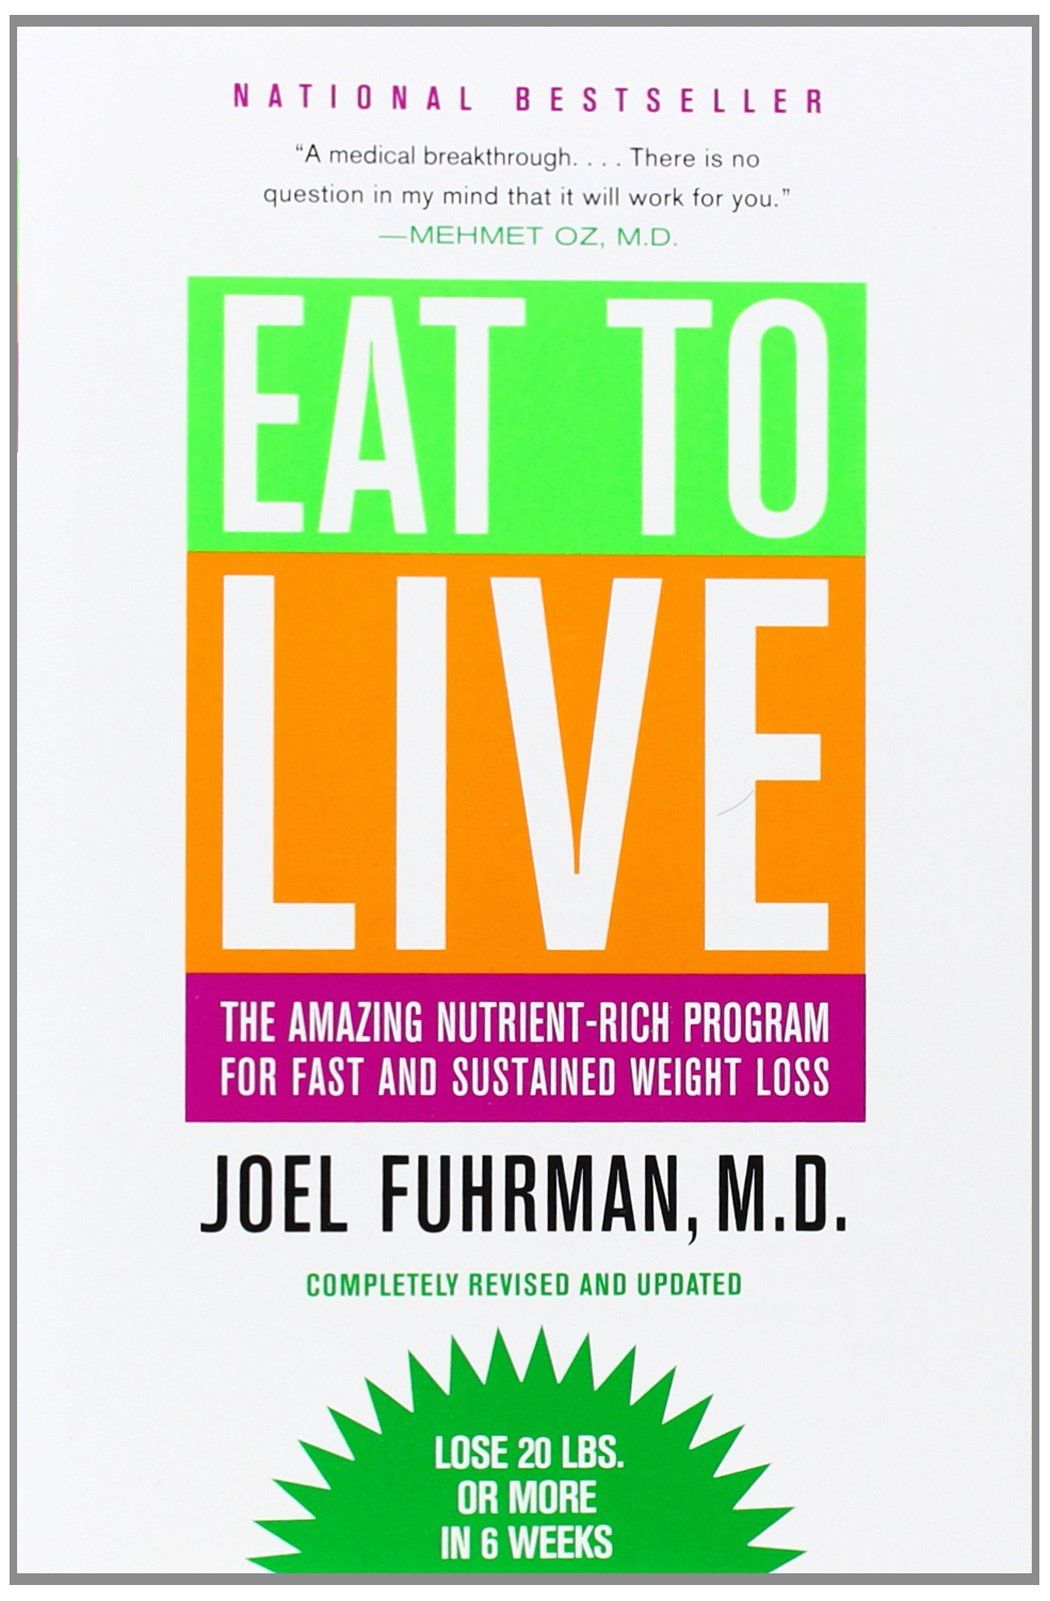 Cover of the book "Eat to Live" by Dr. Joel Fuhrman